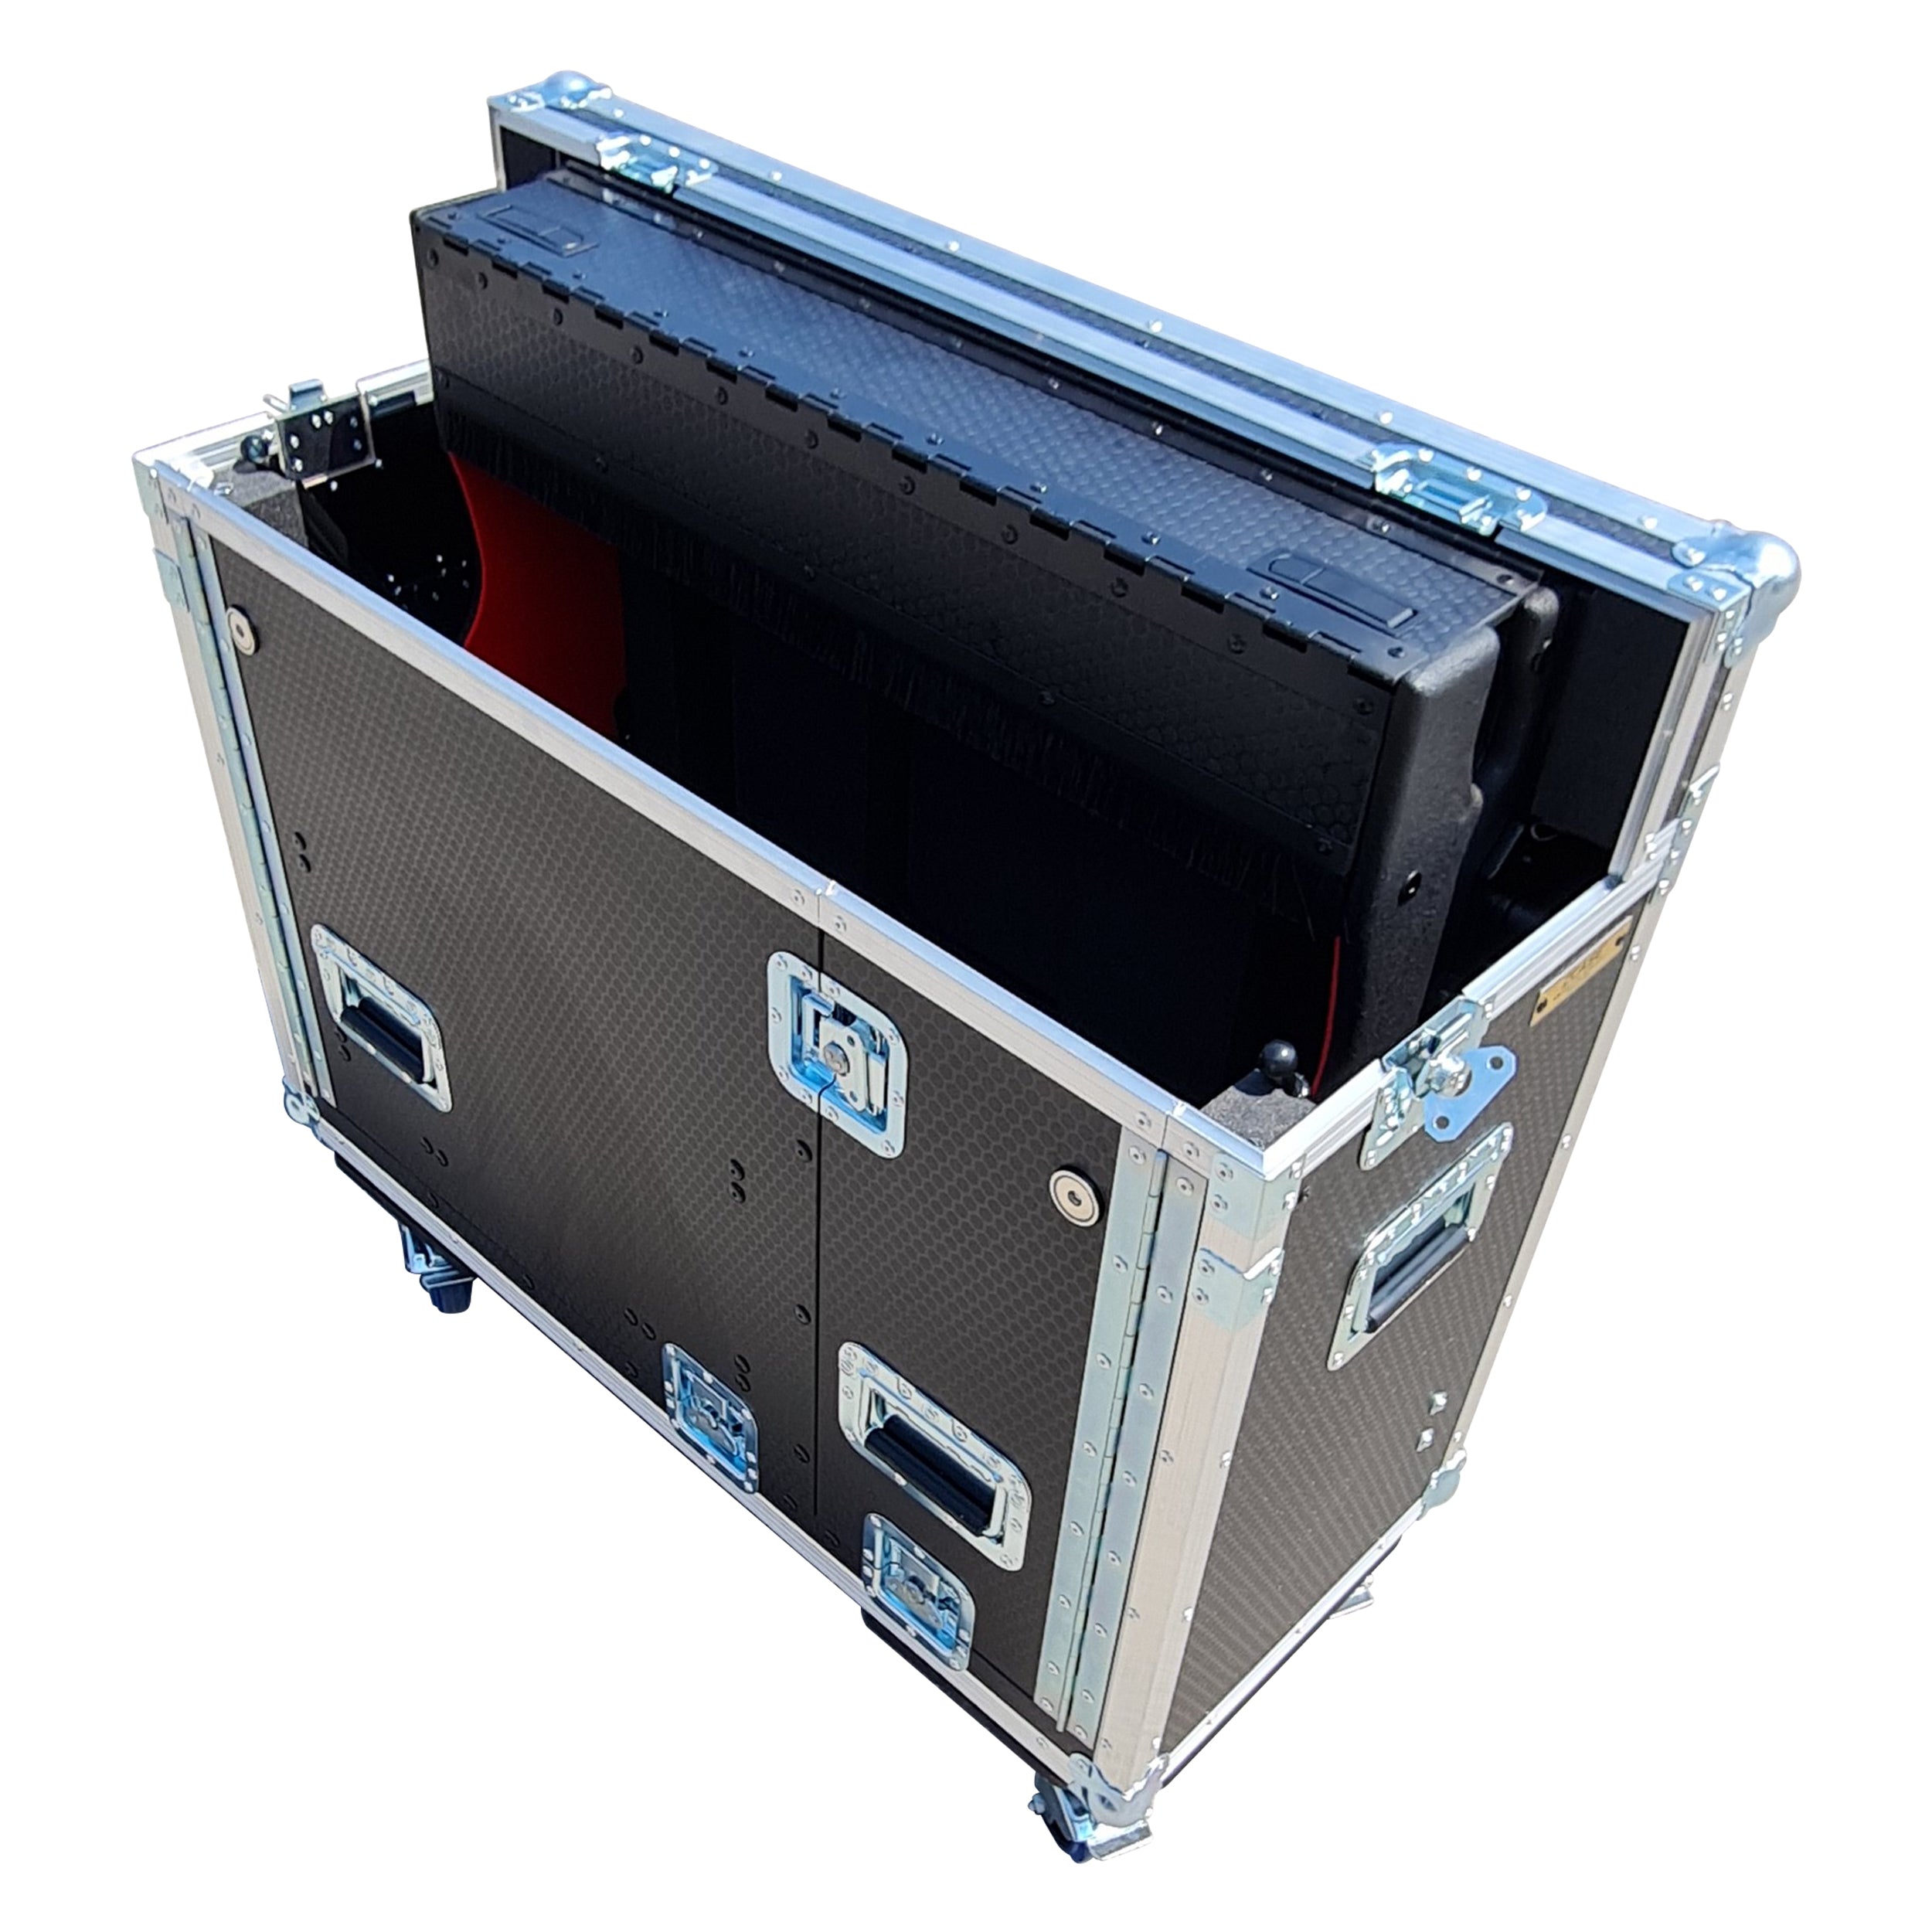 Pro X For DiGiCO S21 Flip-Ready Hydraulic Console Easy Retracting Detachable Lifting Console Flight Case with wheels by ZCASE XZF-DIGS21D